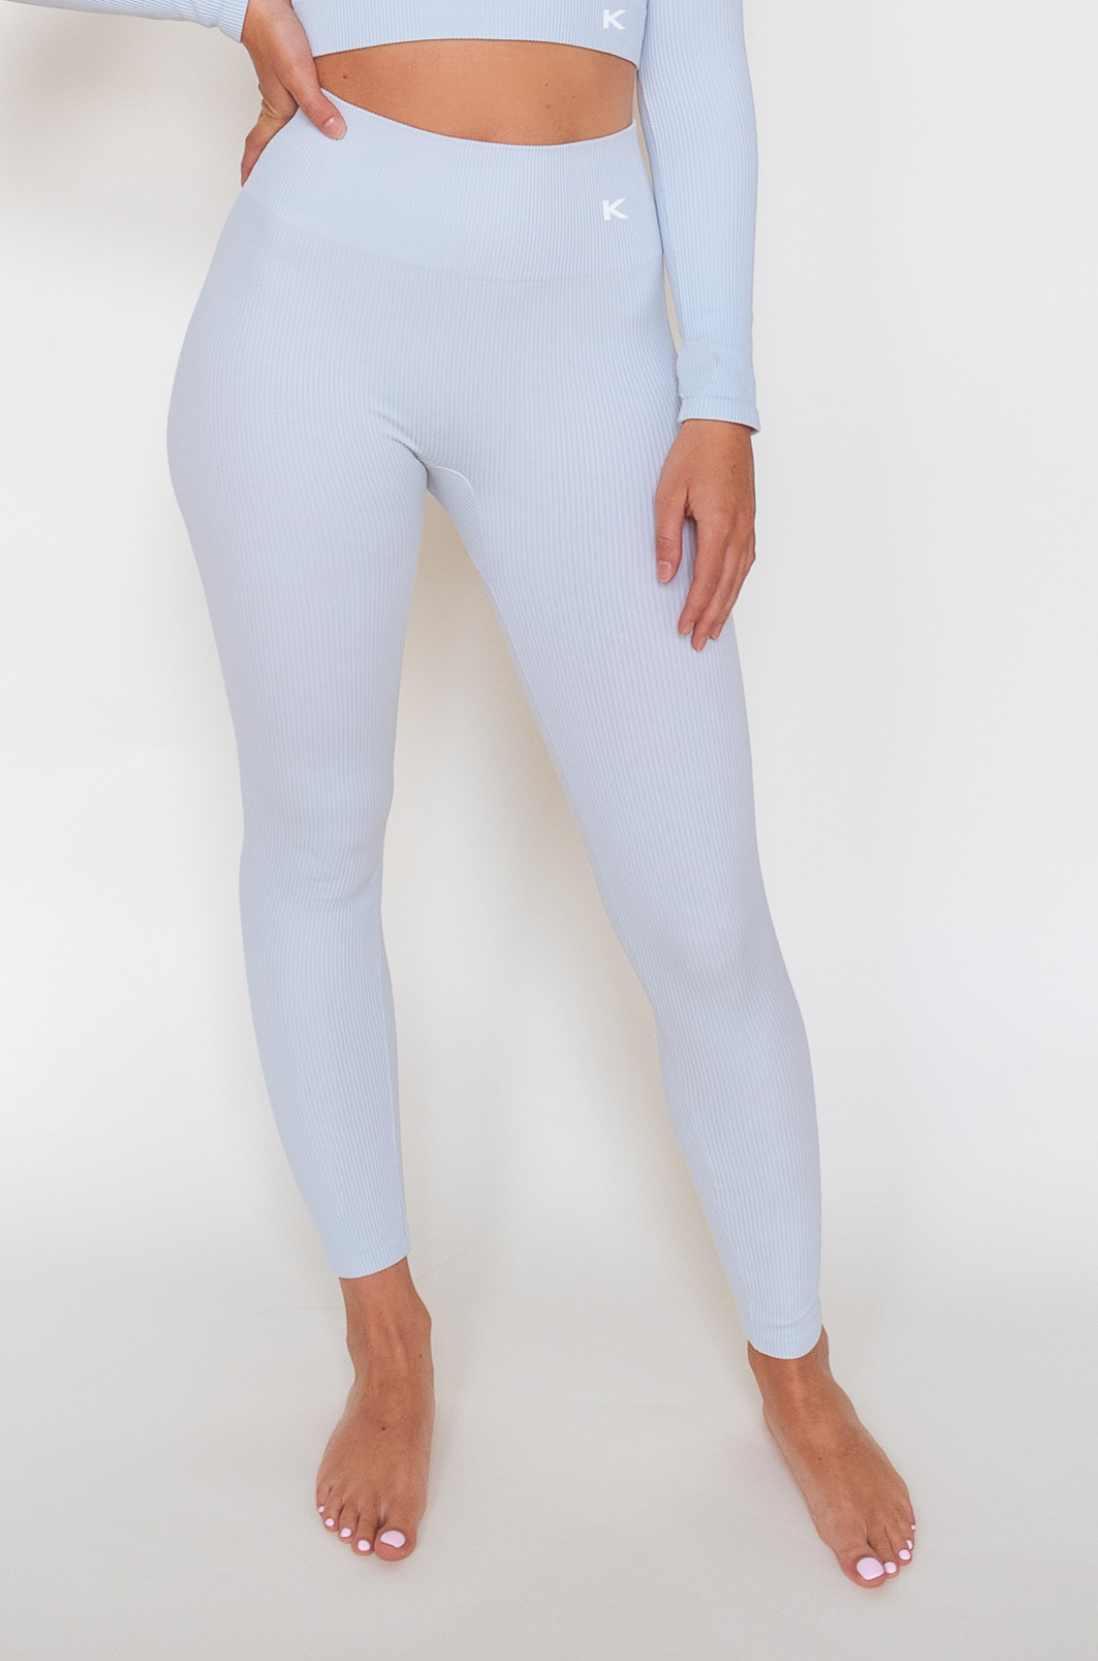 Recycled Plastic Seamless Leggings by Kaly Ora - Baby Blue